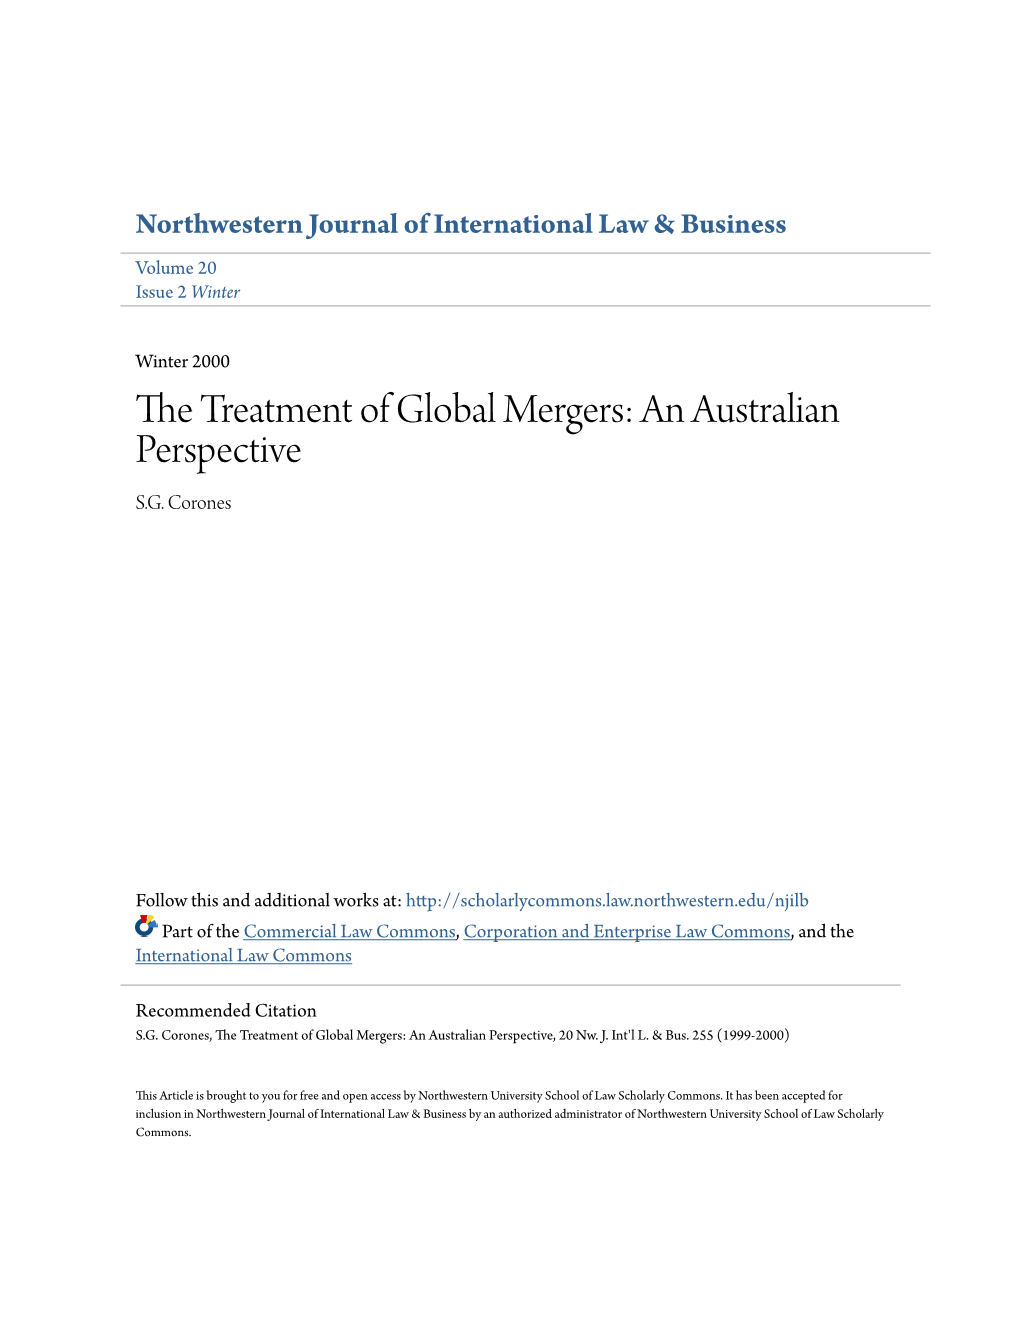 The Treatment of Global Mergers: an Australian Perspective